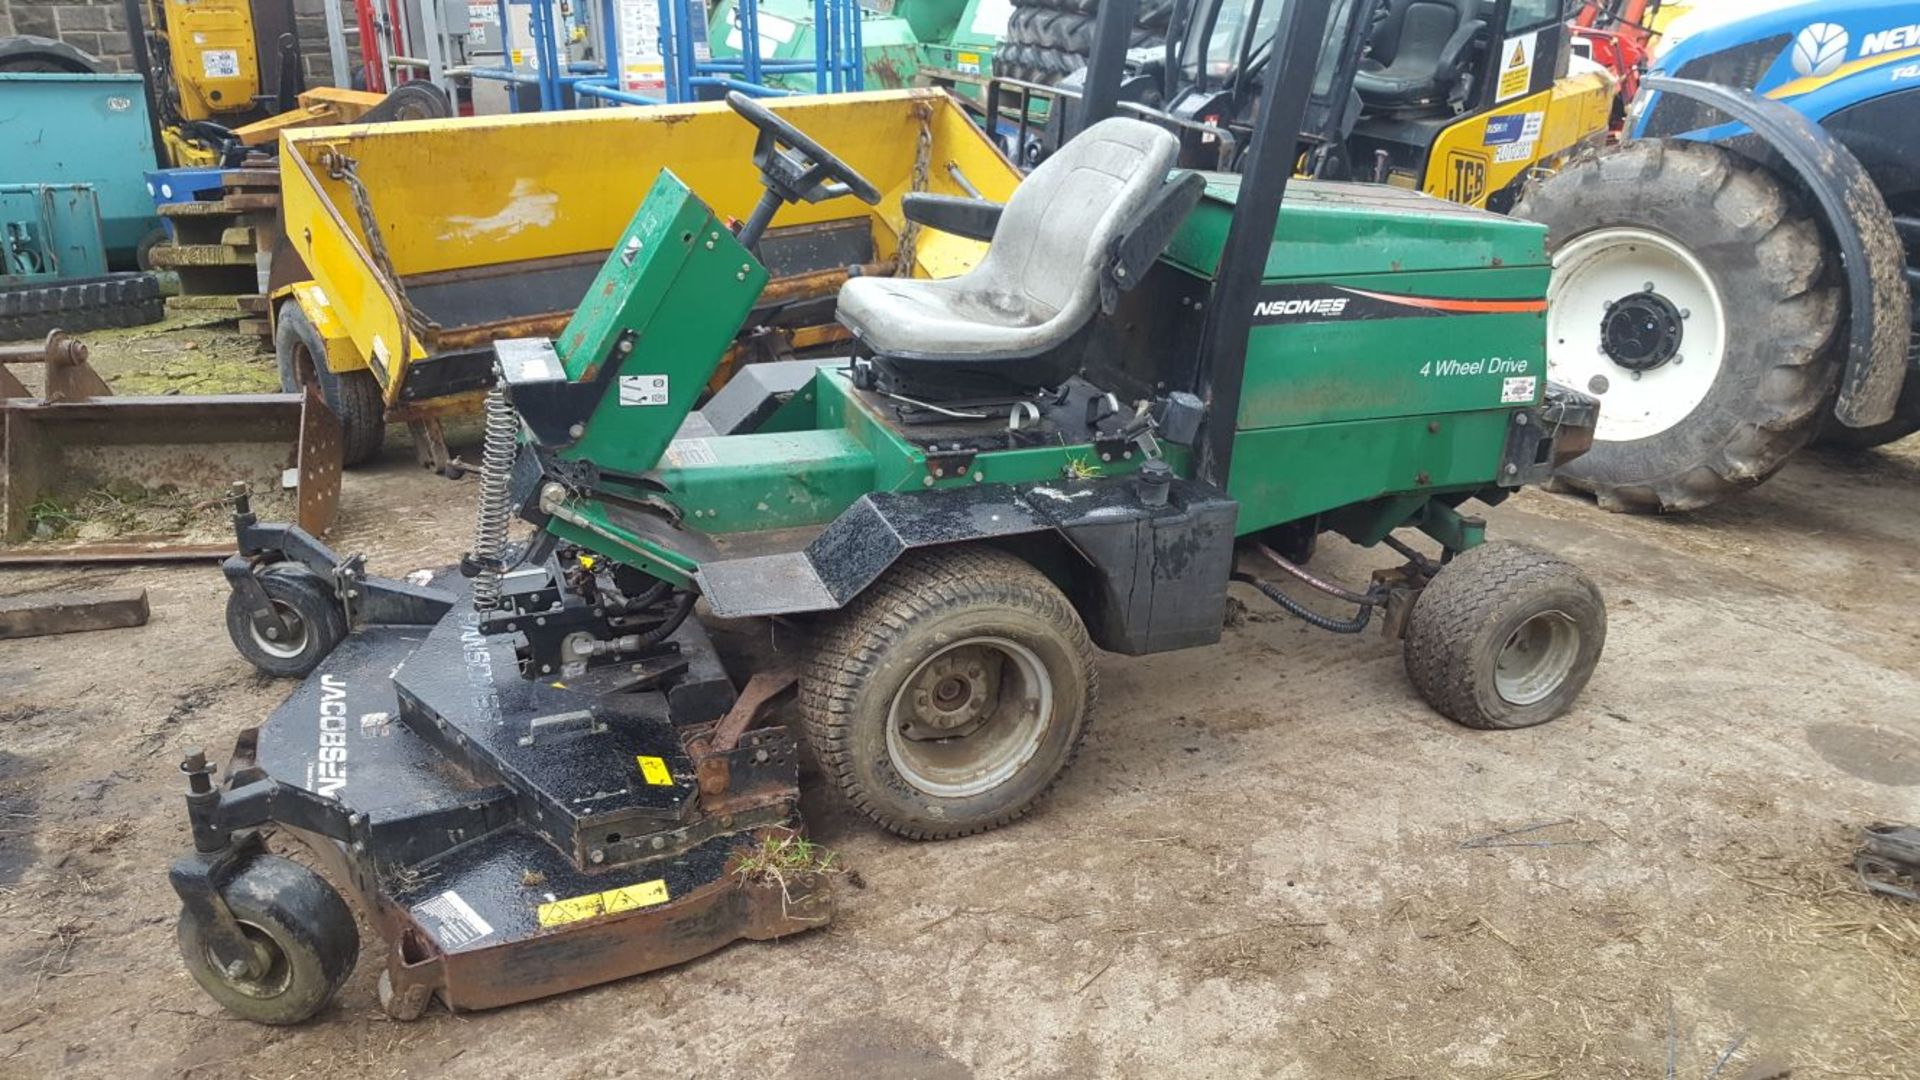 2005/05 REG RANSOMES ROTARY MOWER 4WD FRONTLINE 728D, STARTS, DRIVES AND MOWS *PLUS VAT* - Image 4 of 7